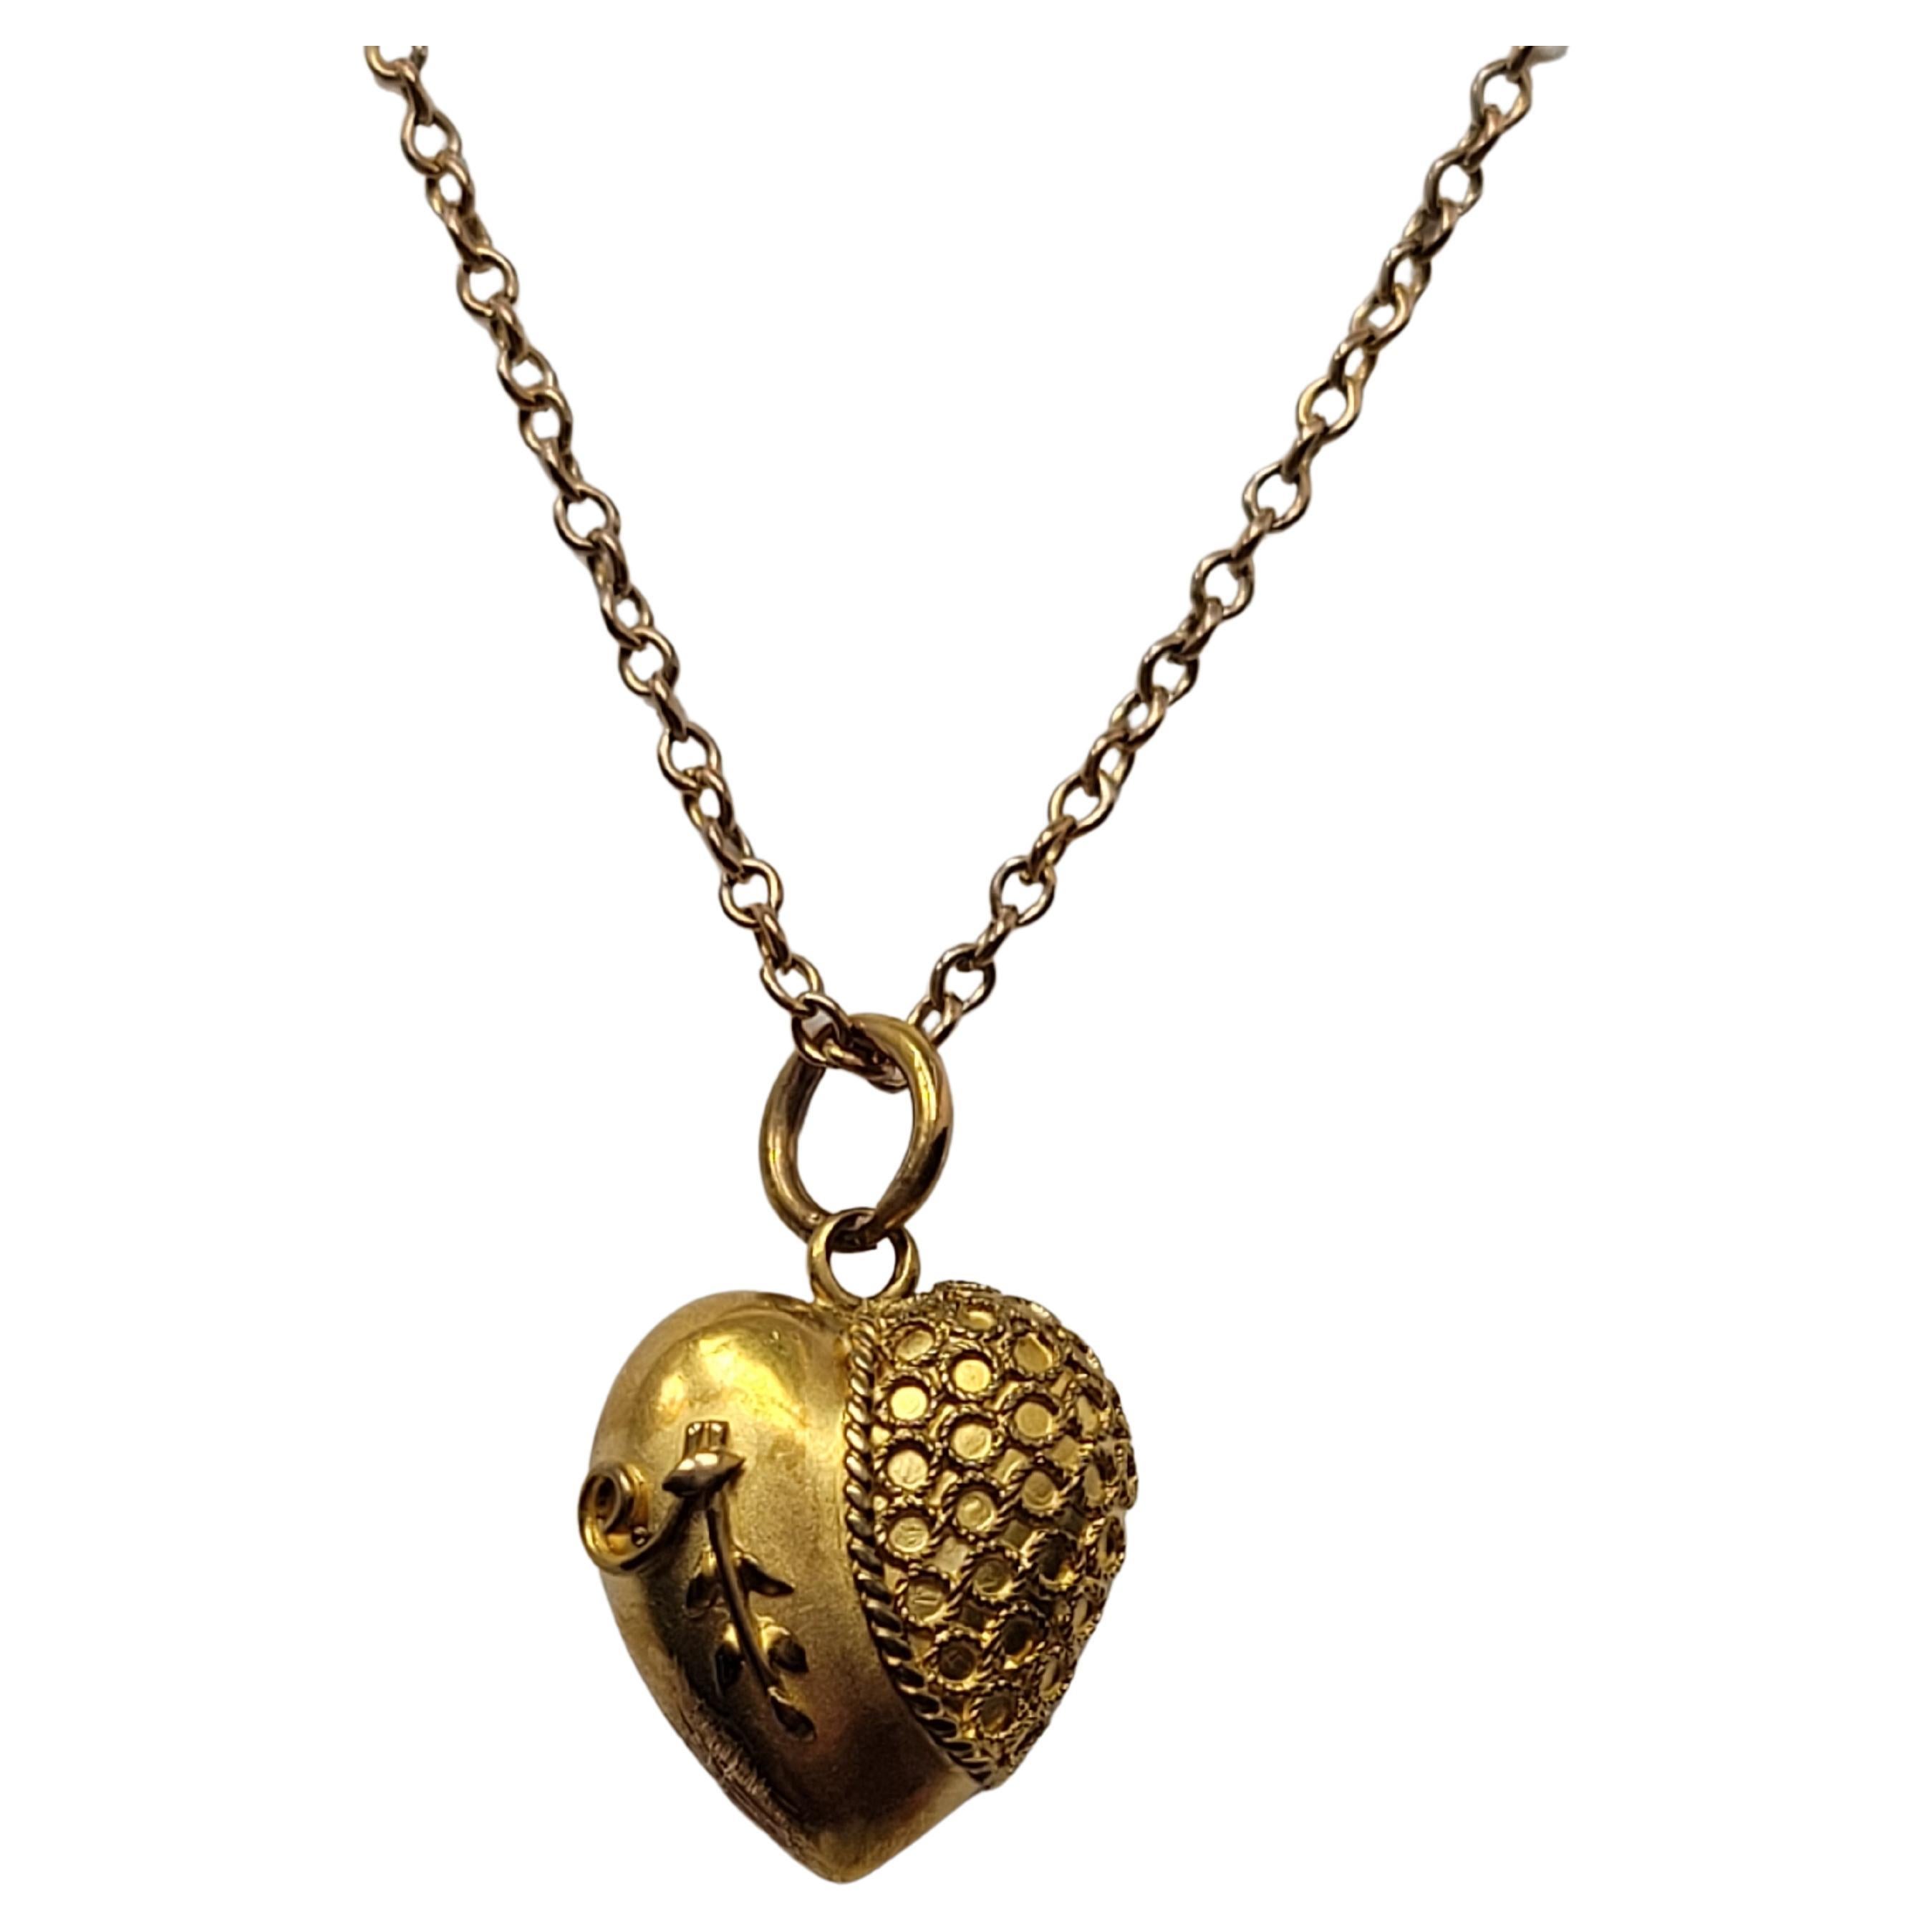 Victorian Gold puffy heart pendant necklace